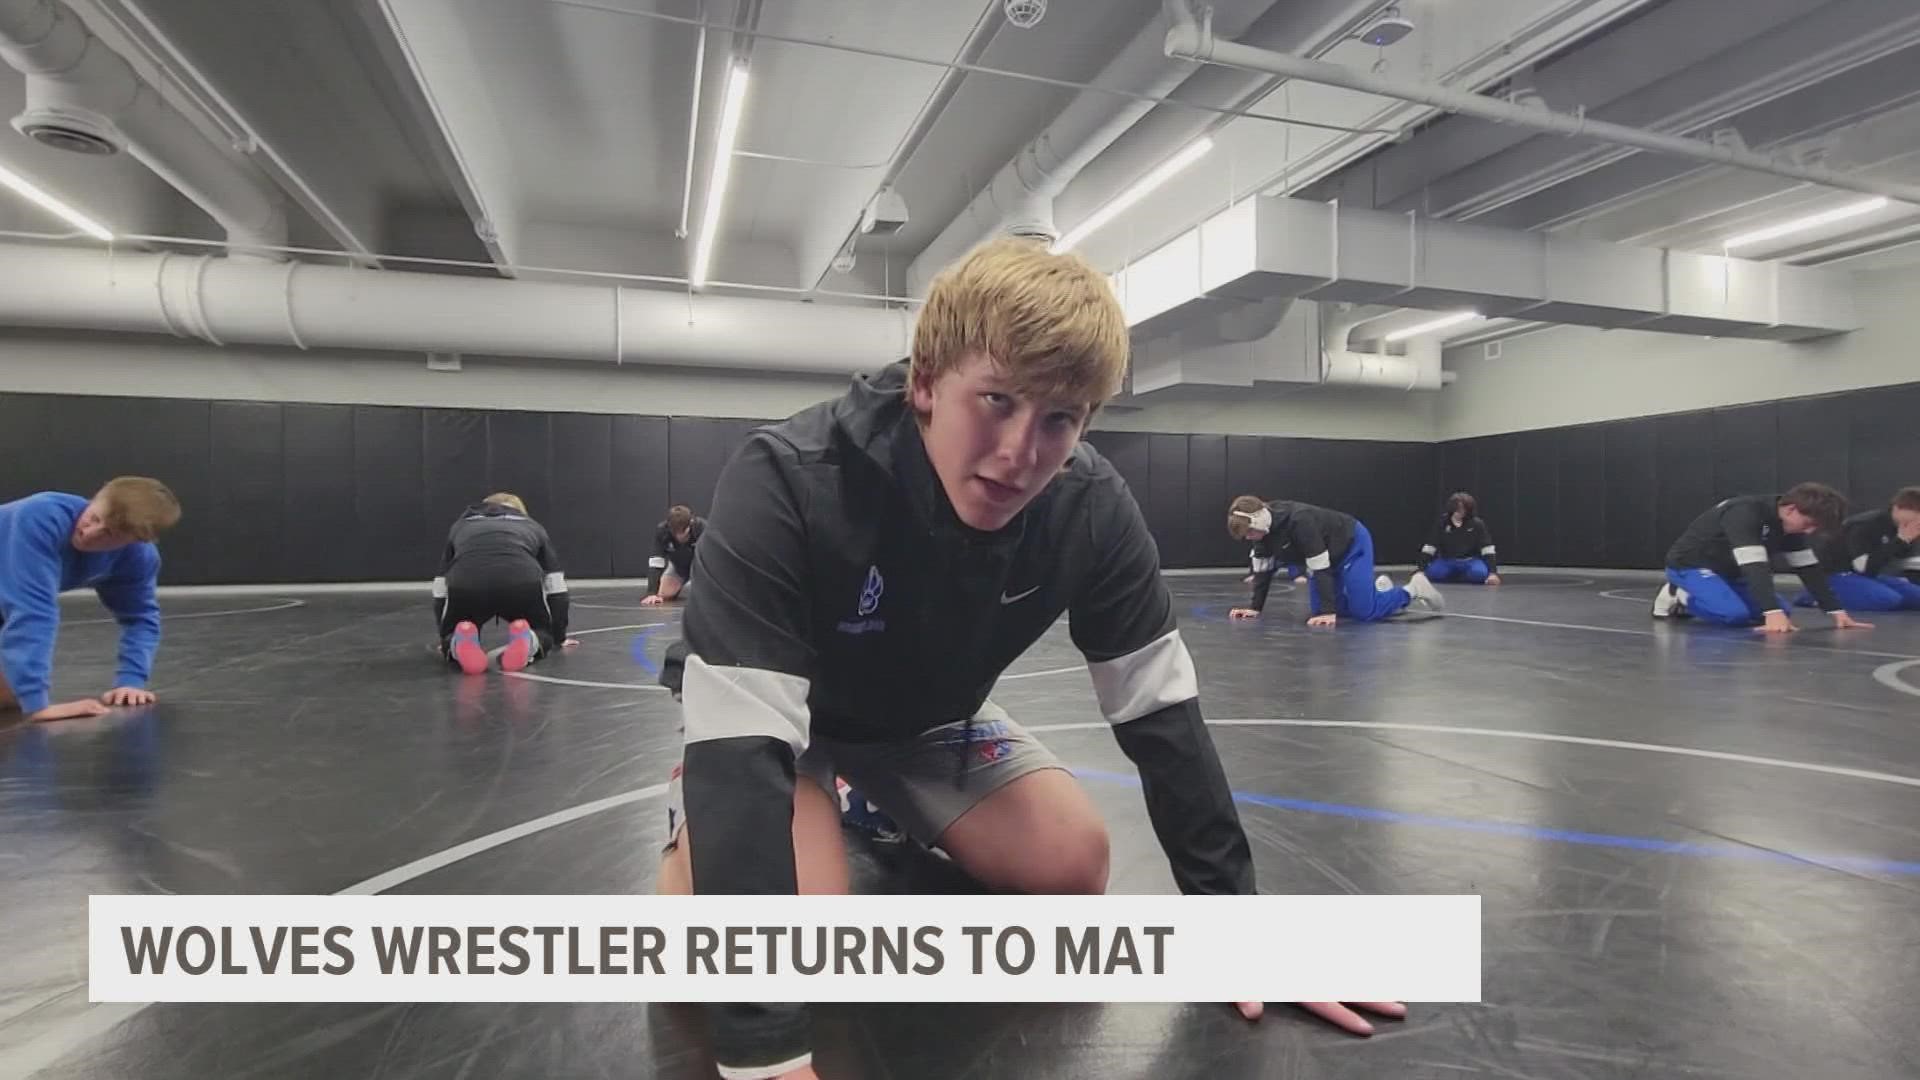 Three months ago, Cael Winter woke up with sharp pains in his chest. After nearly two weeks, two surgeries, shots and check-ups, he was finally able to wrestle.